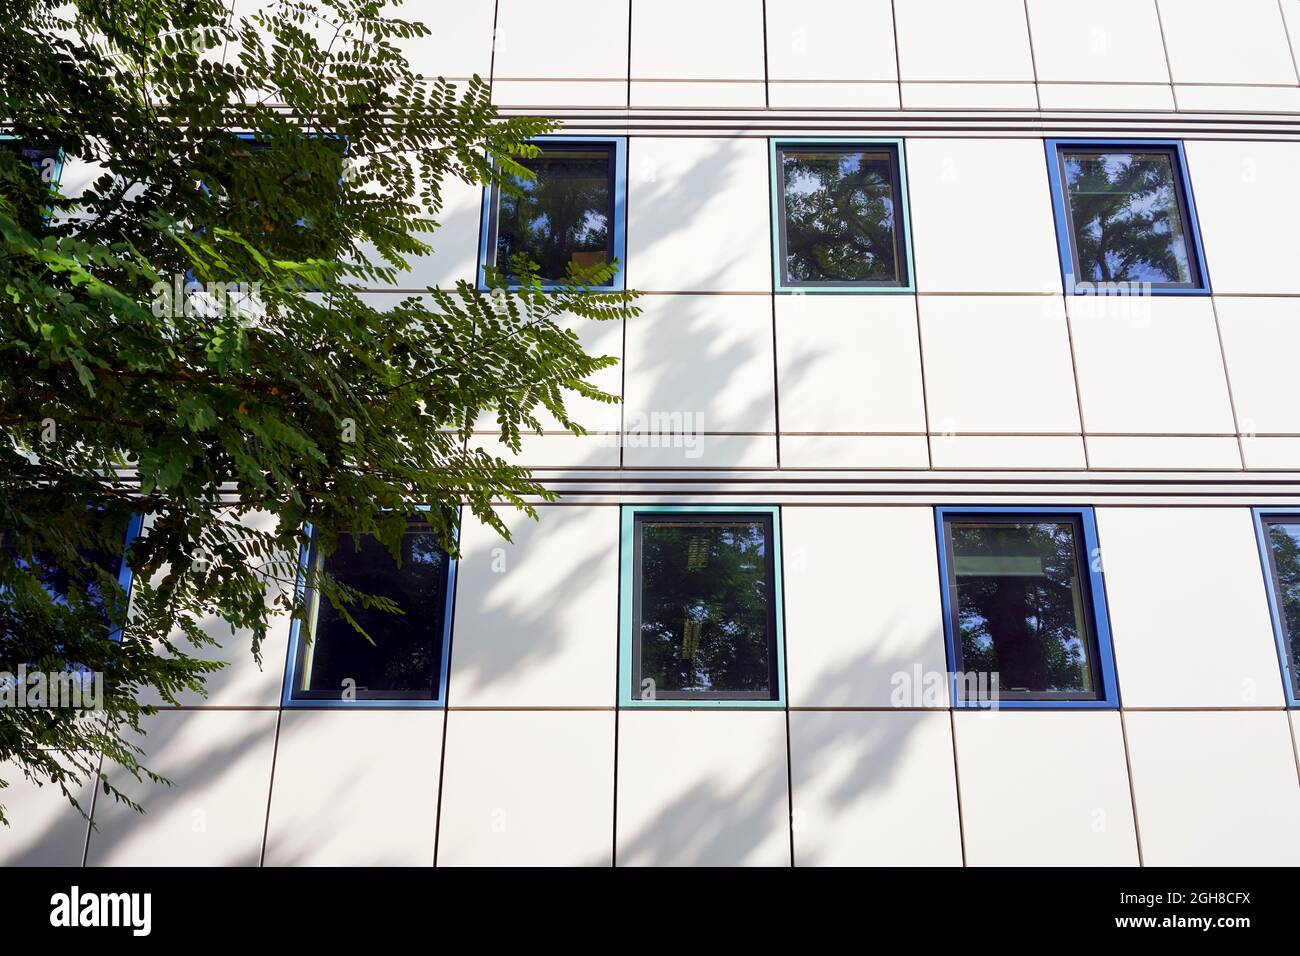 Shadows cast on a building by tree branches and leaves Stock Photo